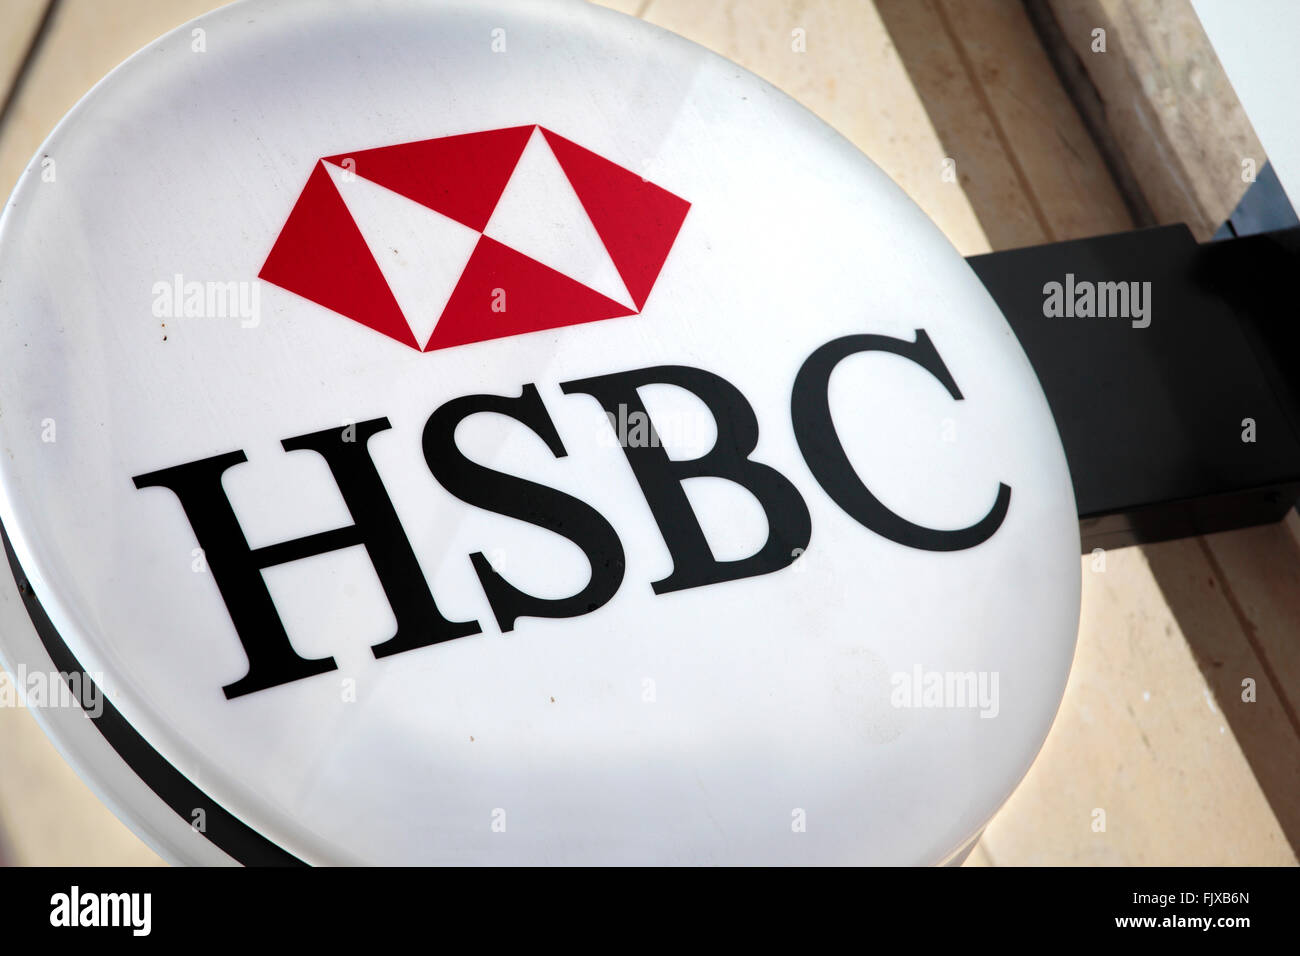 Illuminated HSBC sign above the entrance to a branch of HSBC Bank in Knightsbridge London. Stock Photo